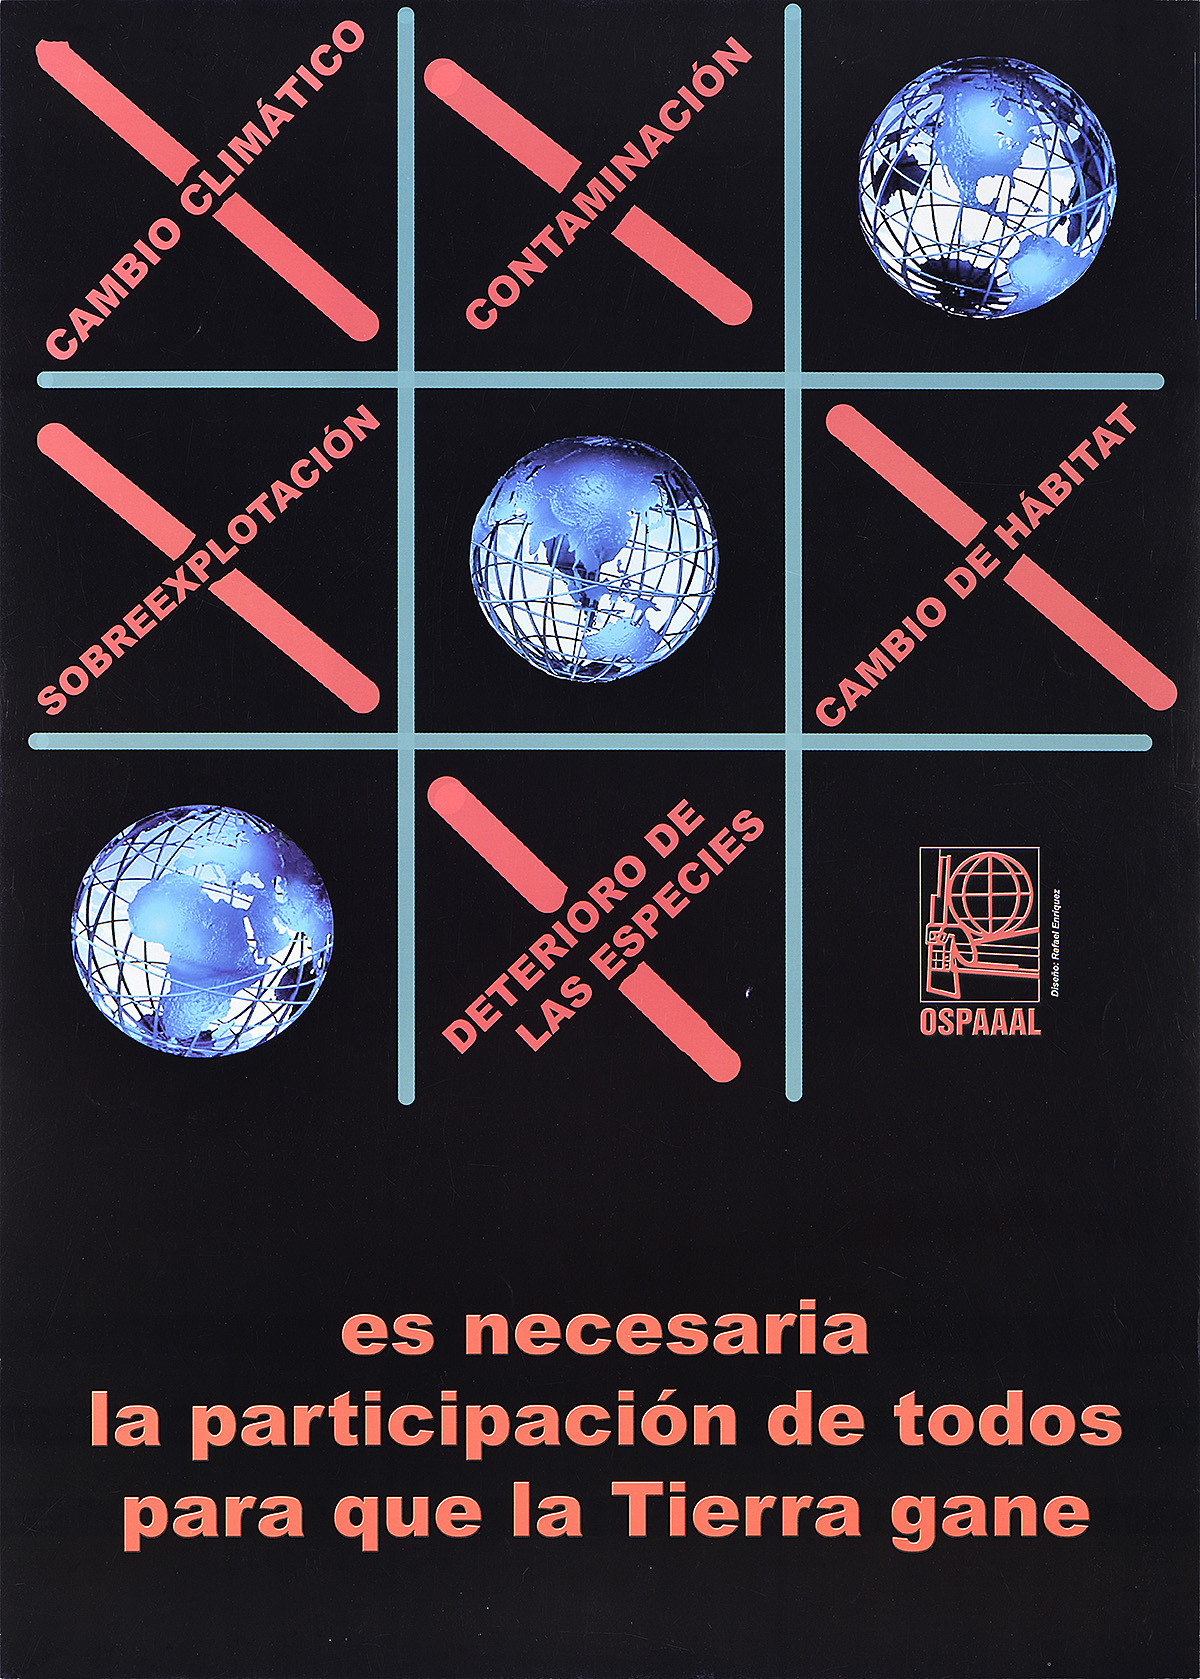 A poster of tic tac toe with three diagonal globes surrounded by x's with climate obstacles.